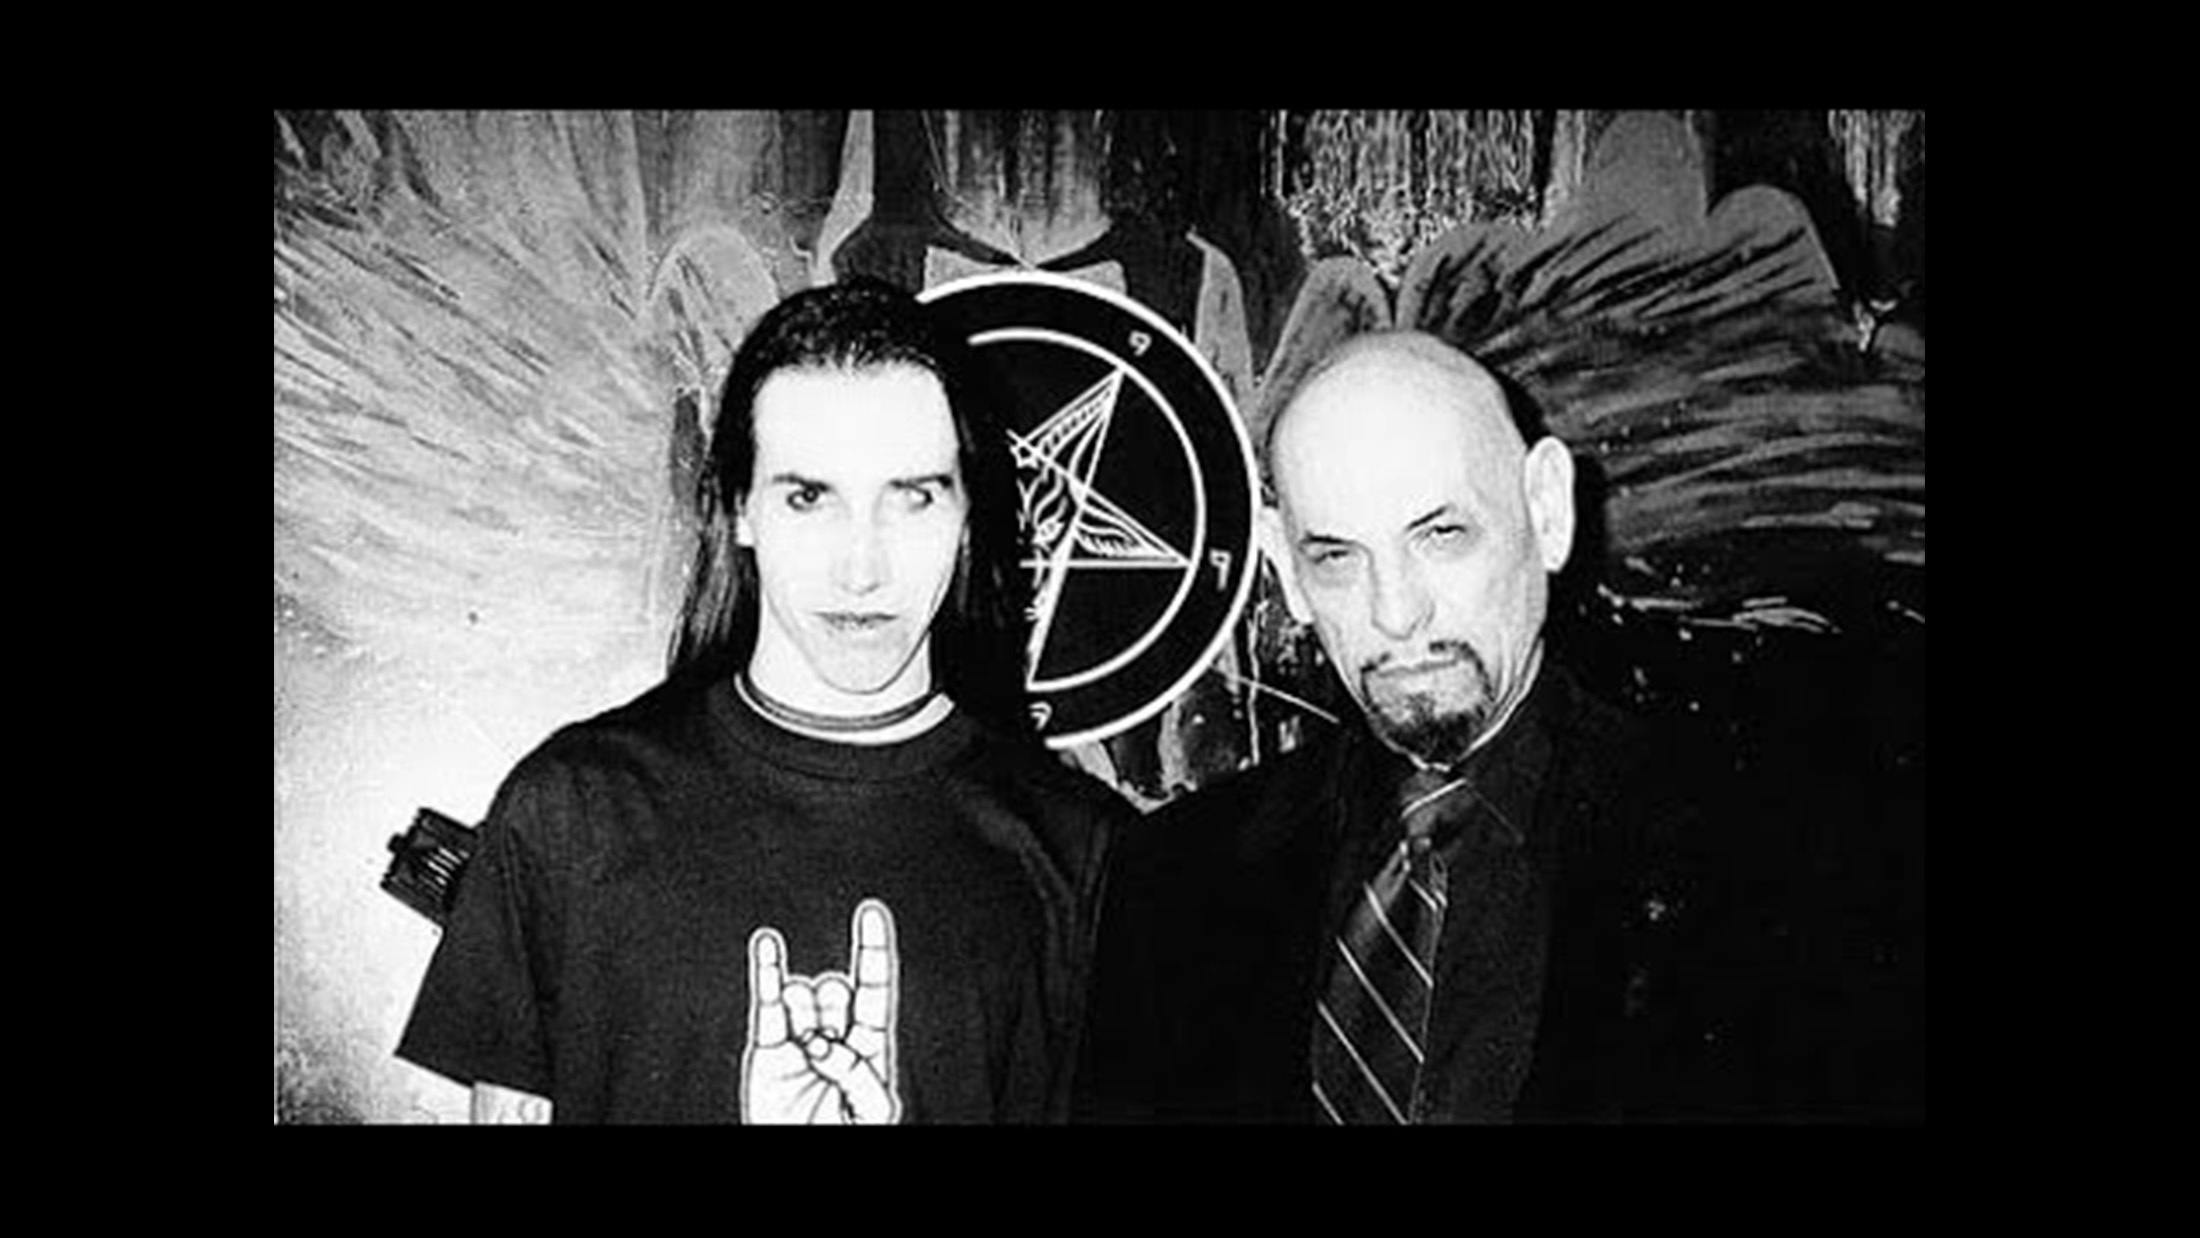 During MM's 1994 tour supporting Nine Inch Nails, such was his growing notoriety that the founder of the Church Of Satan himself, Anton Szandor LaVey, contacted Manson and requested a meeting. LaVey ended up making him a minister, and Manson later wrote the foreword to his final book, Satan Speaks!

Manson is available for Satanic weddings, baptisms and funerals. Or not.